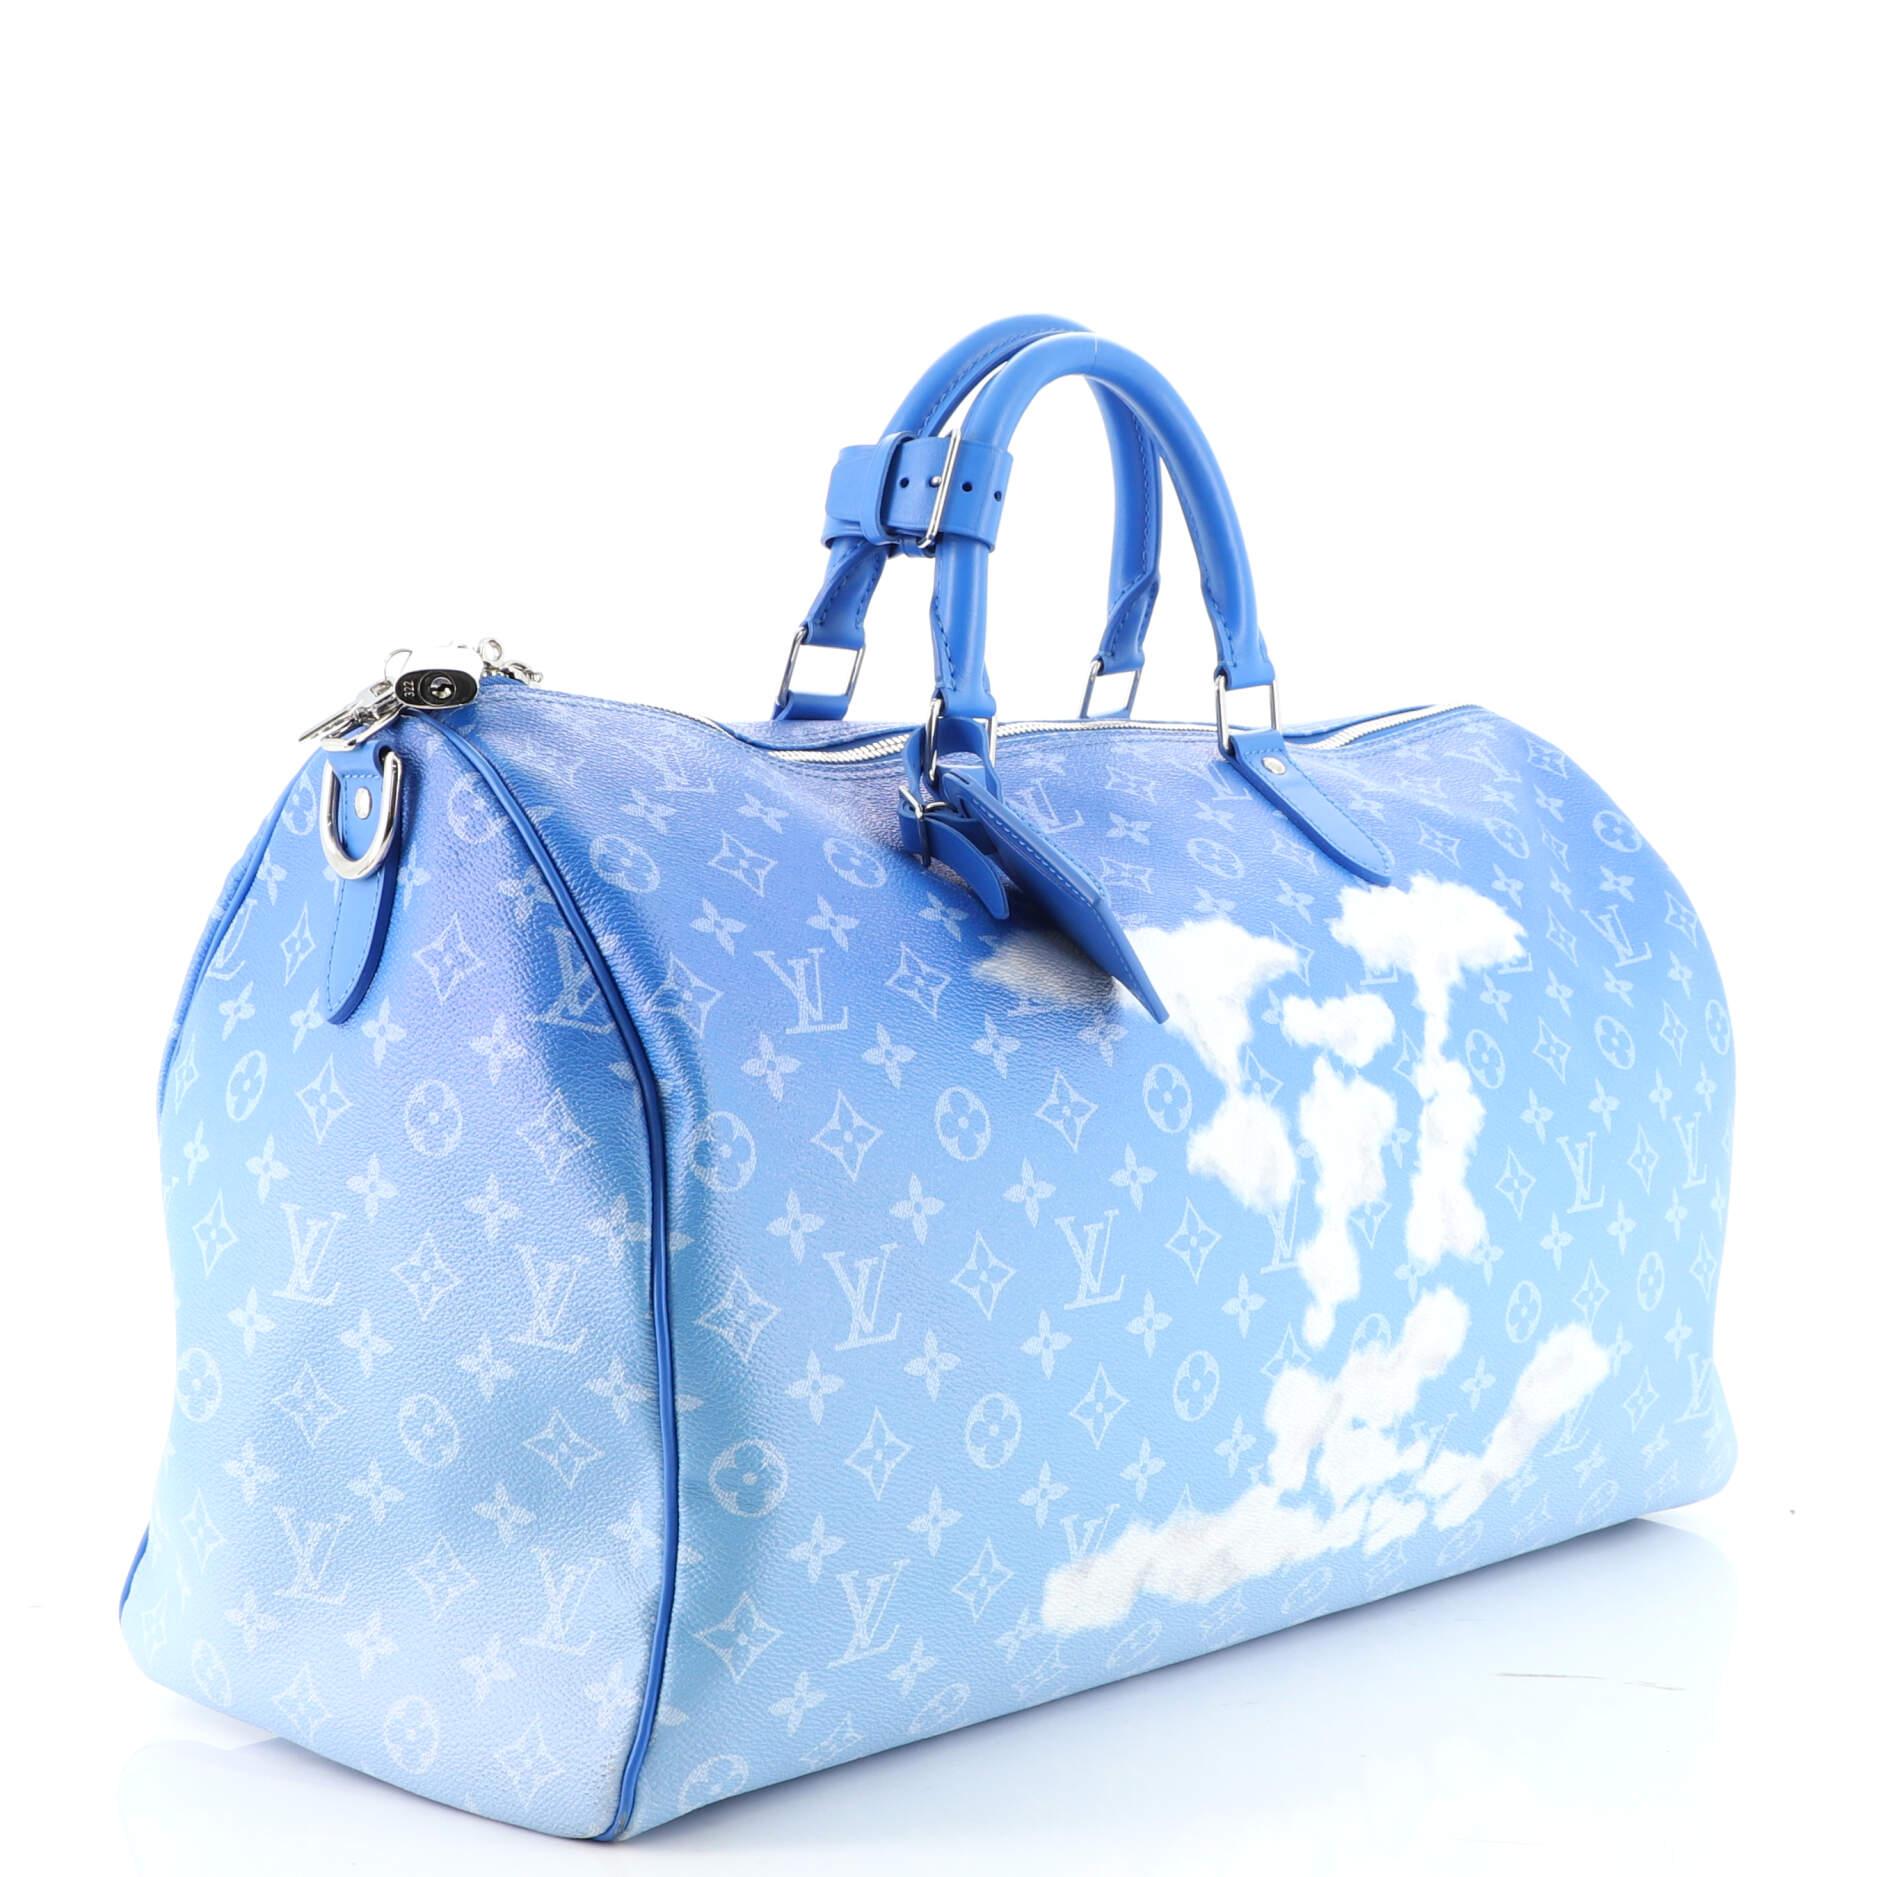 Blue Louis Vuitton Keepall Bandouliere Bag Limited Edition Monogram Clouds 50